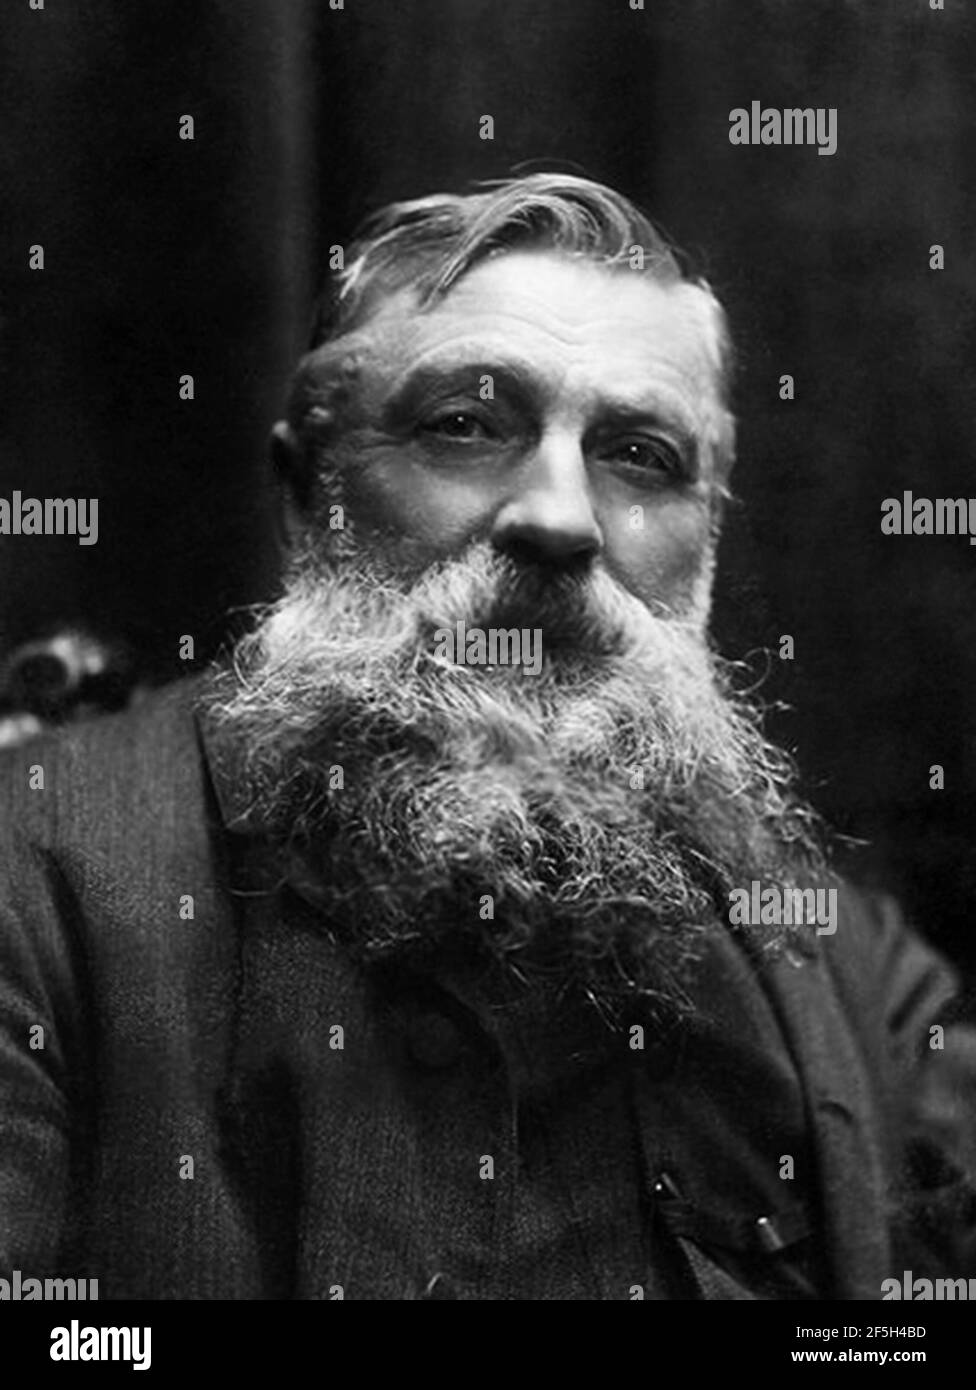 Vintage portrait photo of French sculptor Auguste Rodin (1840 – 1917). Stock Photo